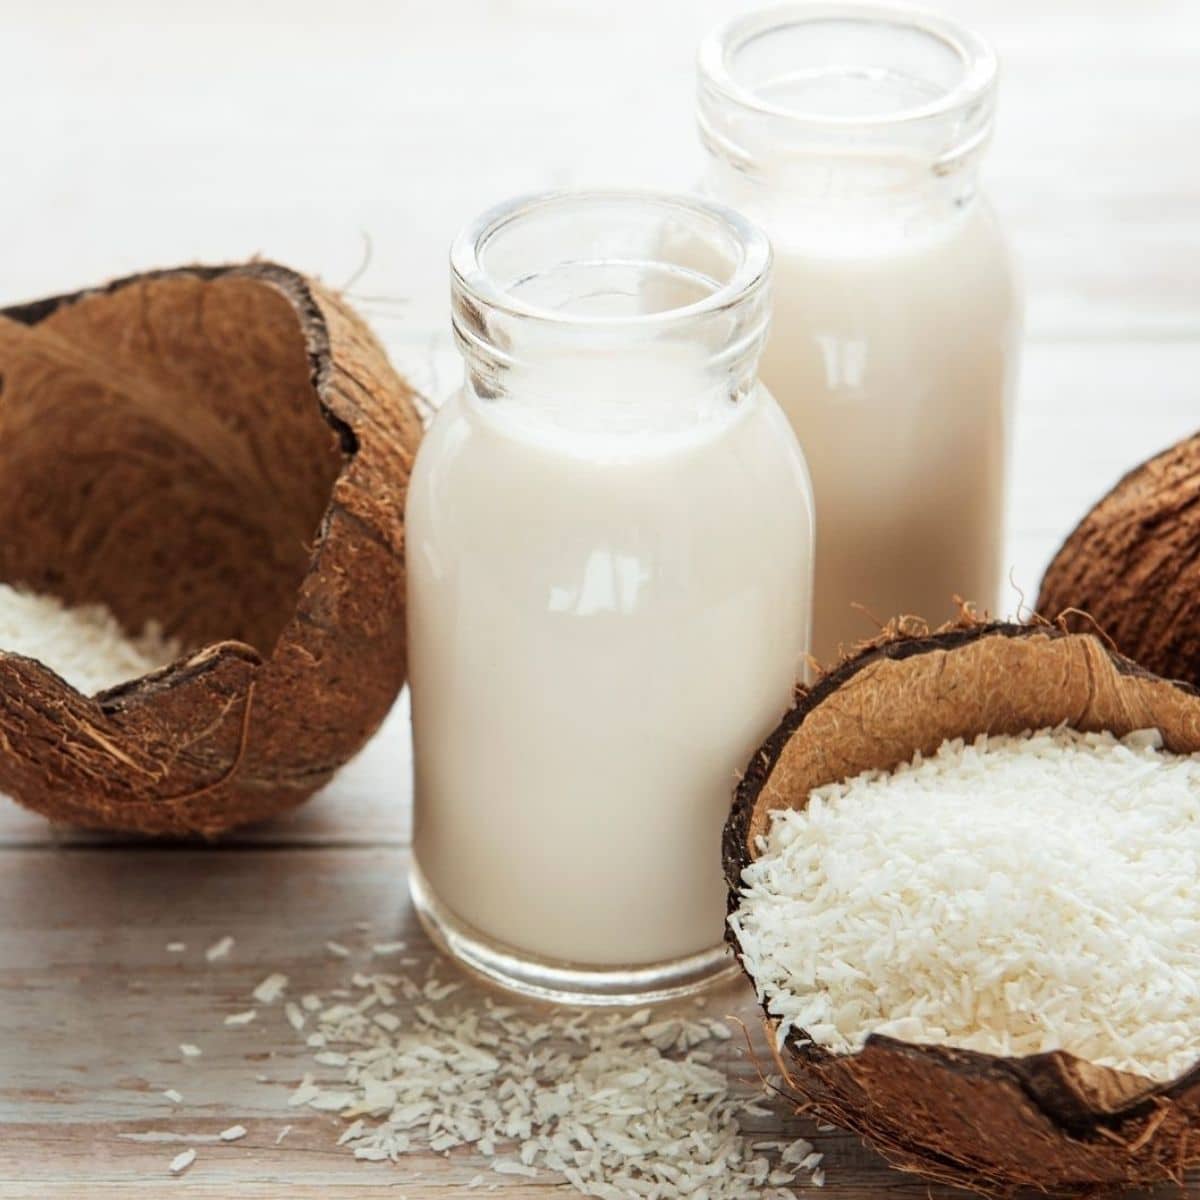 Best coconut milk substitute to use in any cooking or baking recipe.